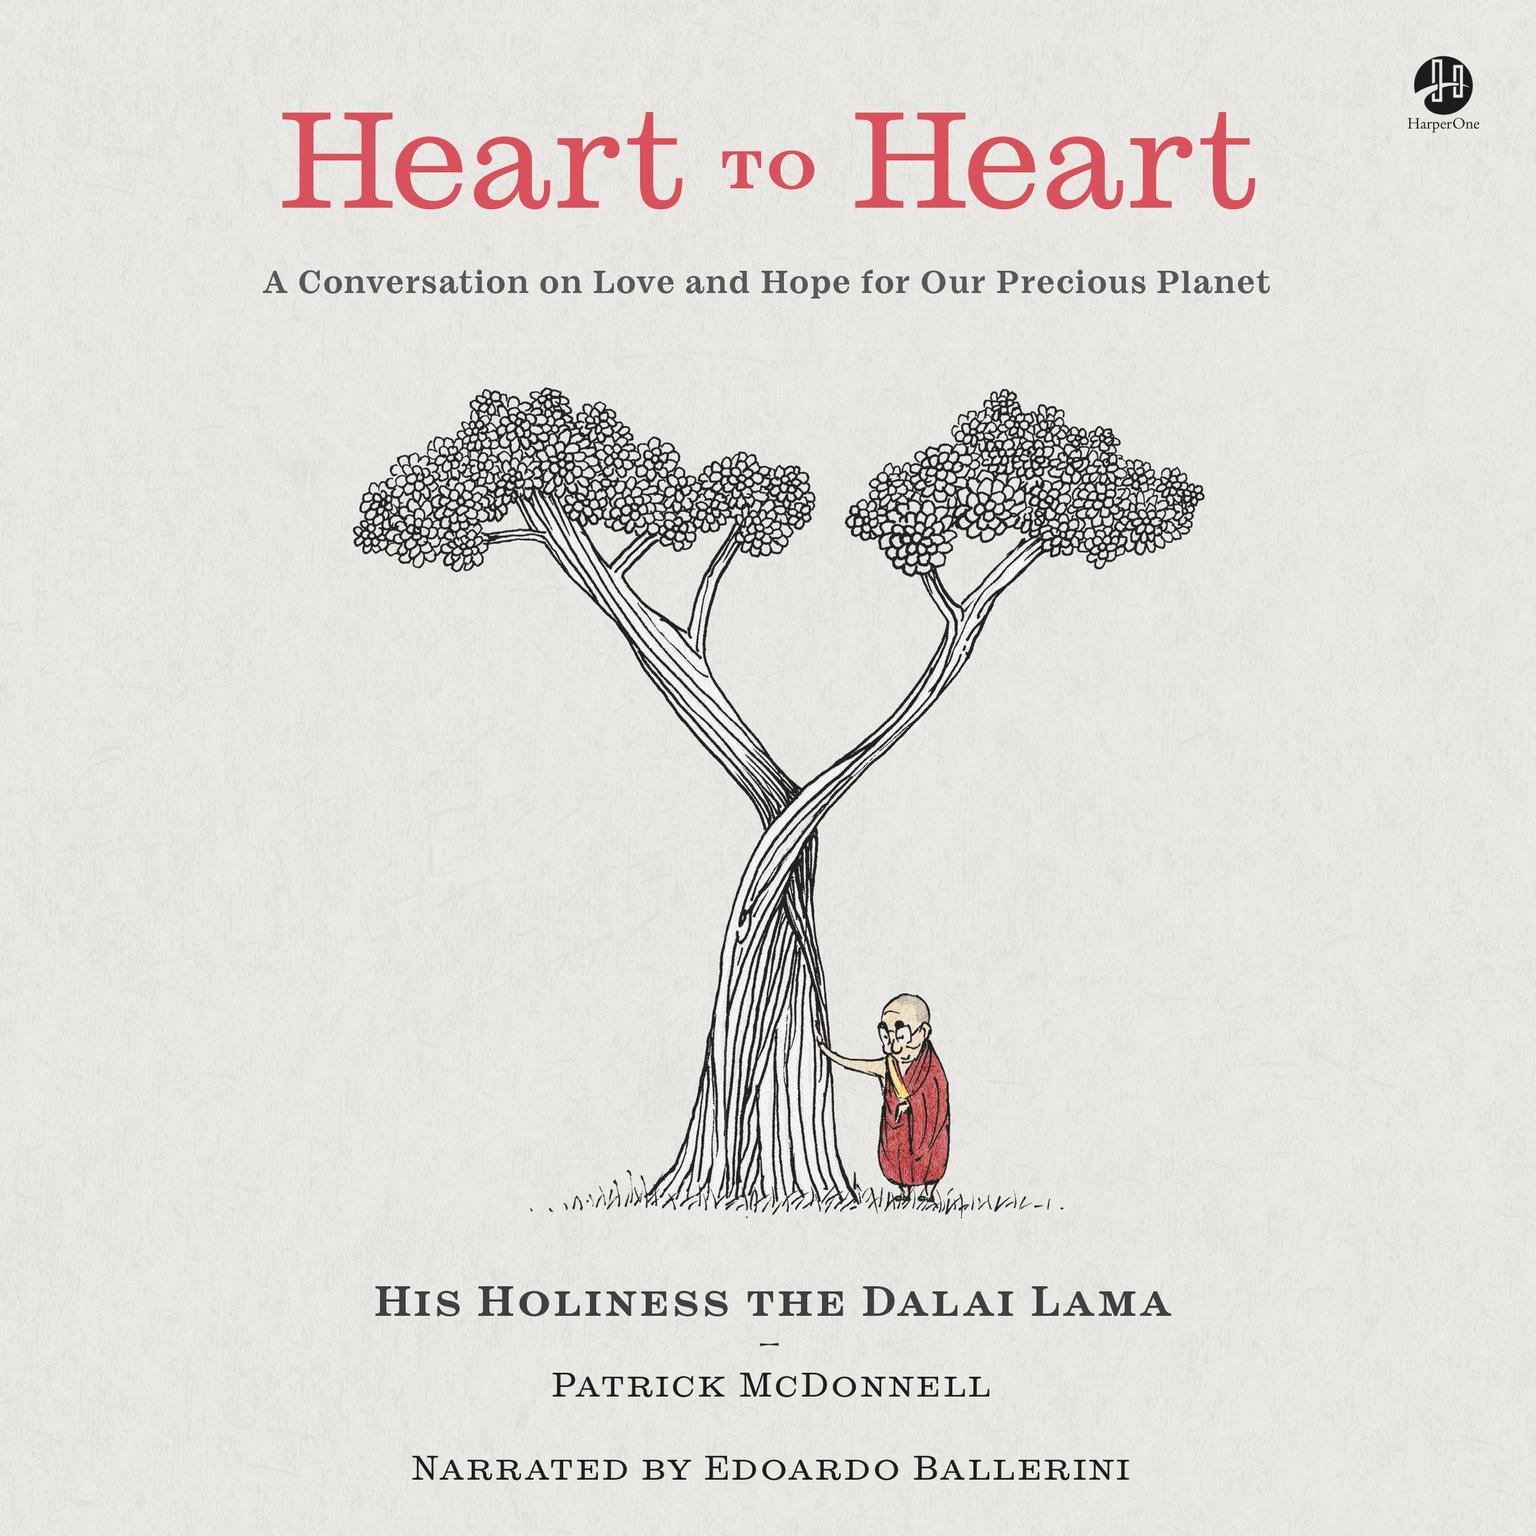 Heart to Heart: A Conversation on Love and Hope for Our Precious Planet Audiobook, by His Holiness the Dalai Lama